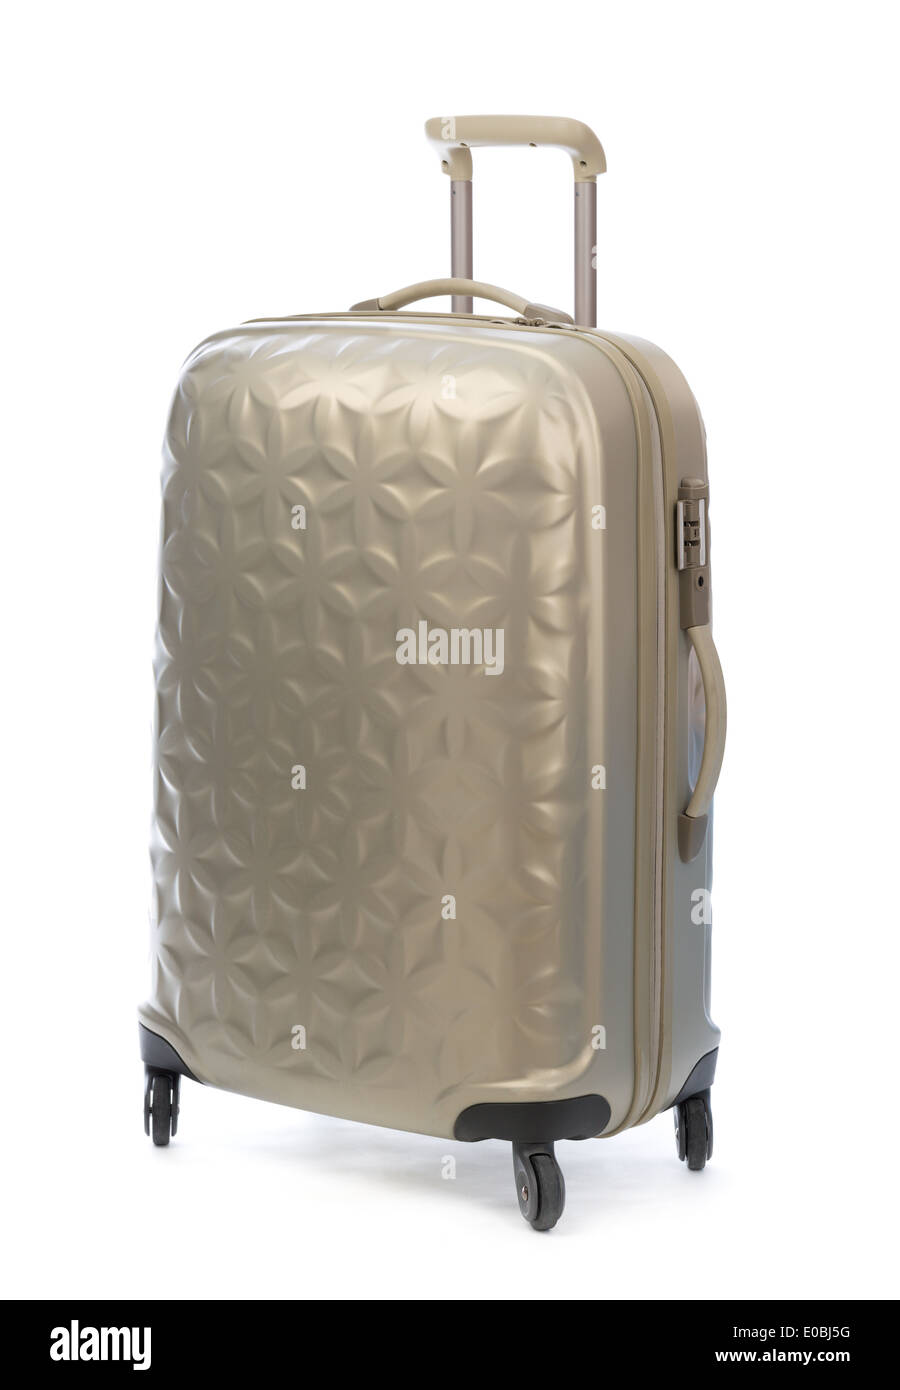 Beige plastic suitcase on wheels for travel. Isolate on white. Stock Photo